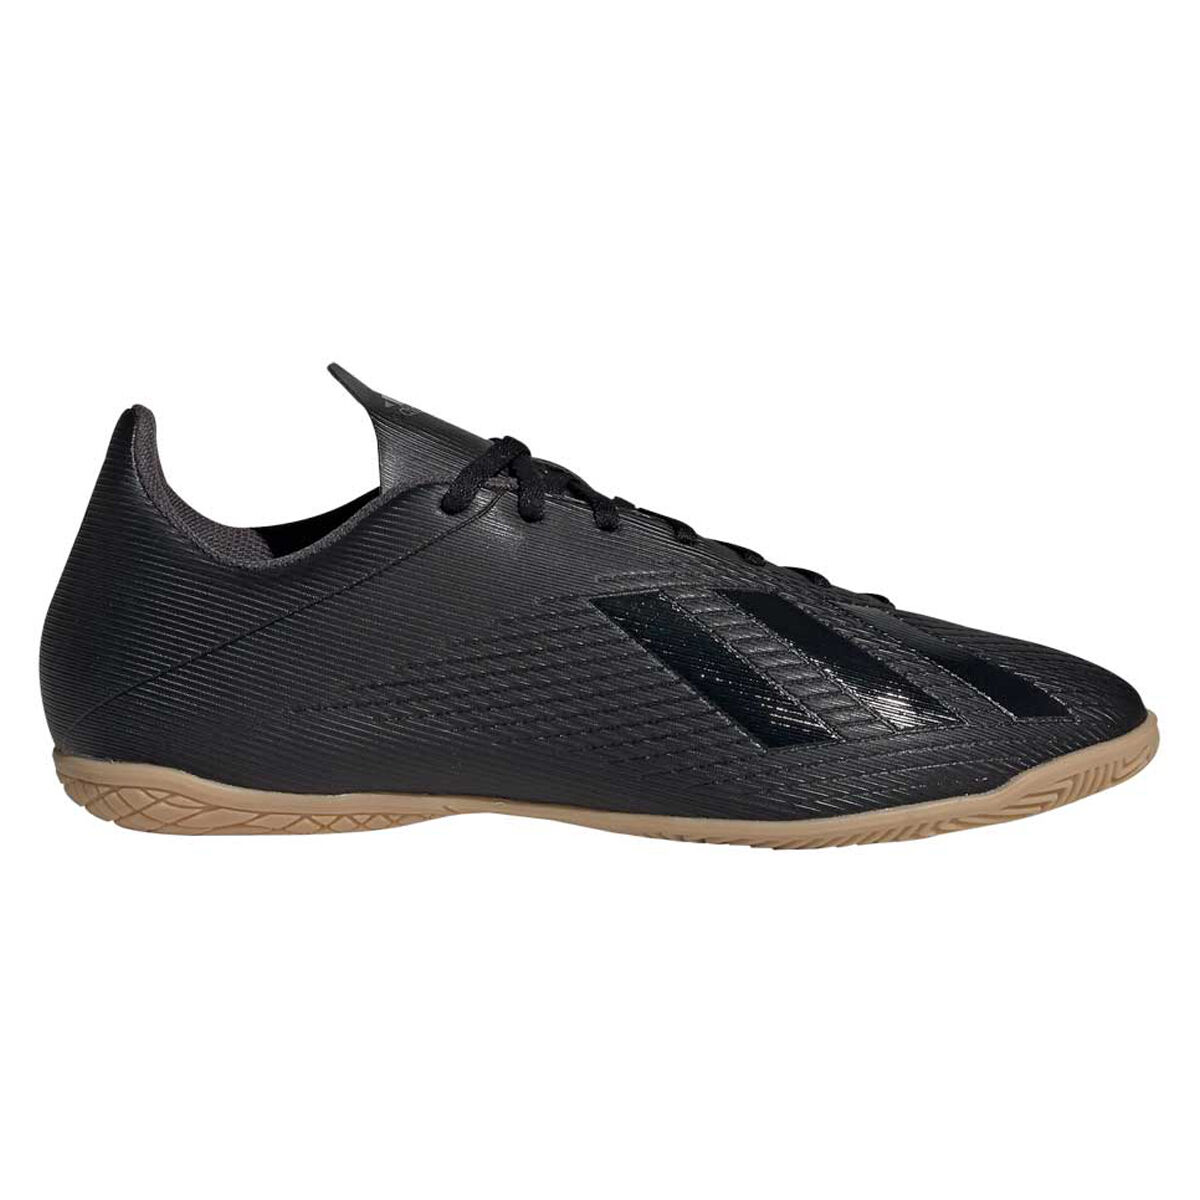 adidas soccer shoes indoor